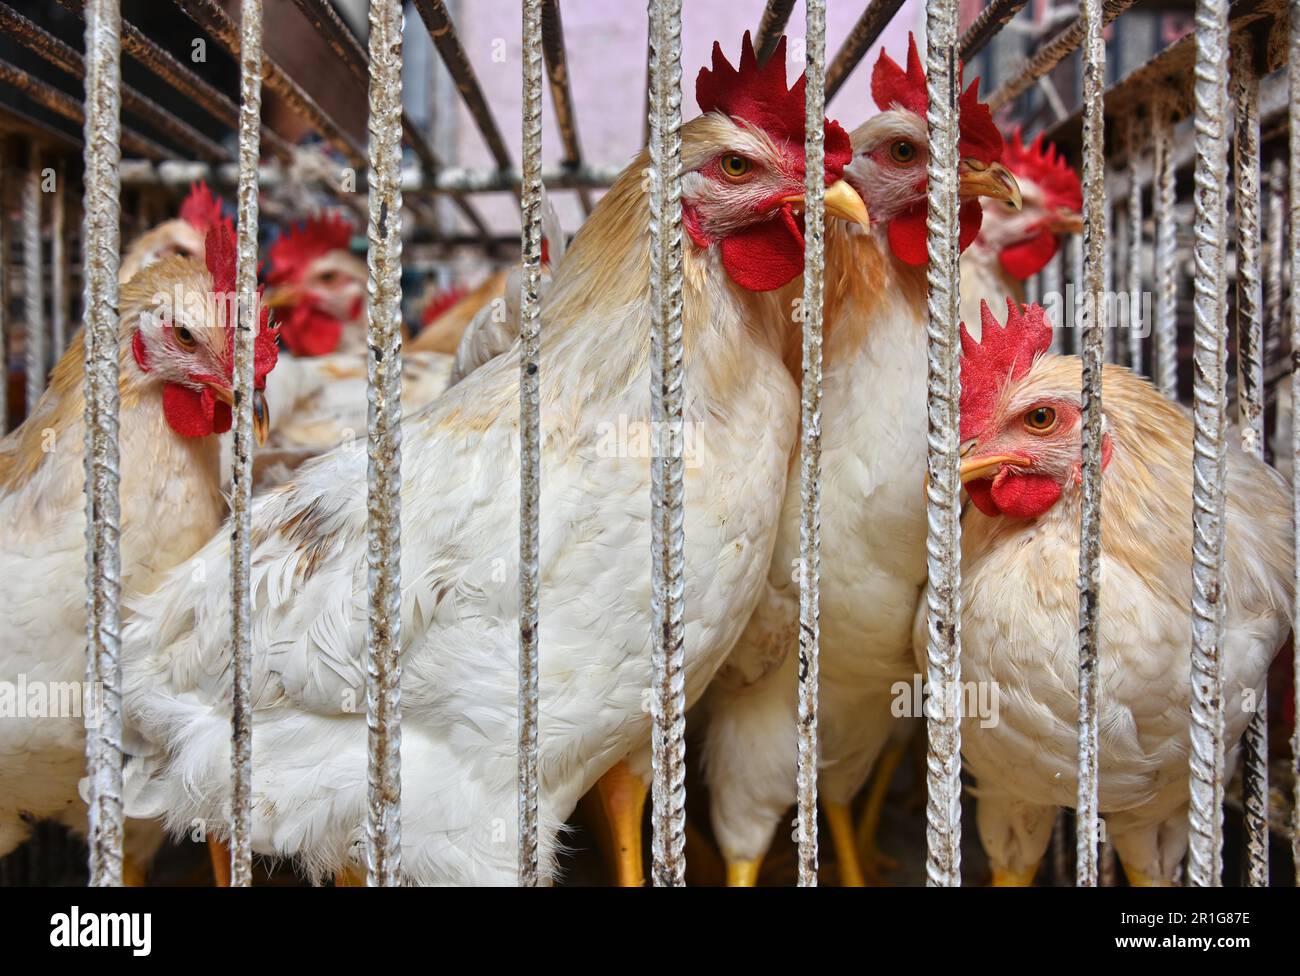 Chickens in a cage ready for sale on the arab market place Stock Photo